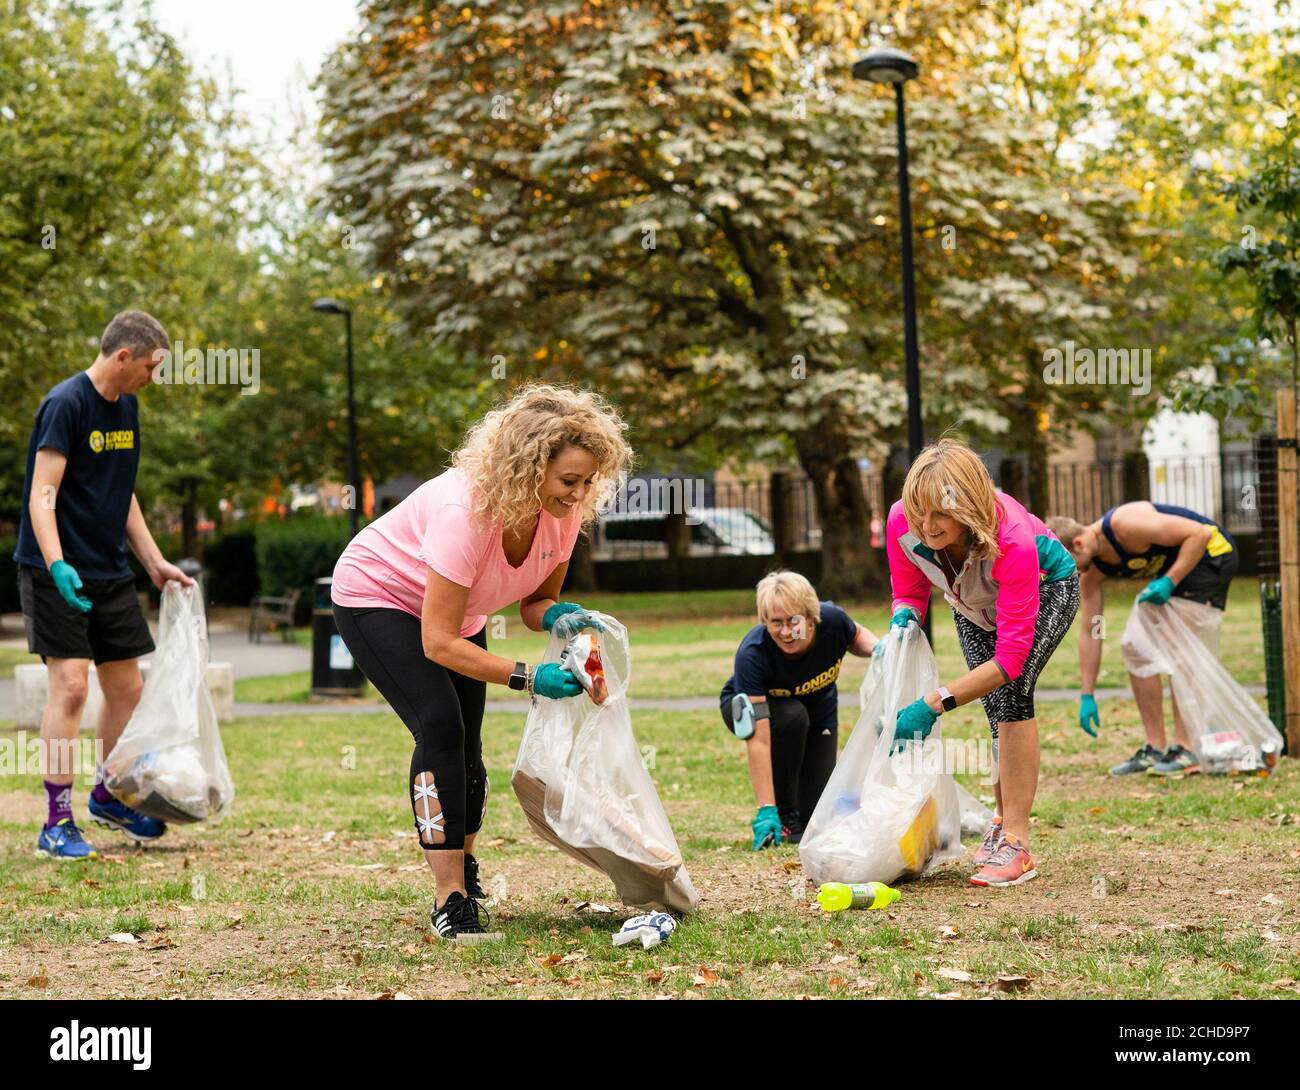 Nadia Sawalha and Kaye Adams go Plogging, which is a Scandinavian fitness trend where people pick up plastic whilst out walking or running, with Fitbit and London City Runners in support of WasteAid, in central London. Stock Photo